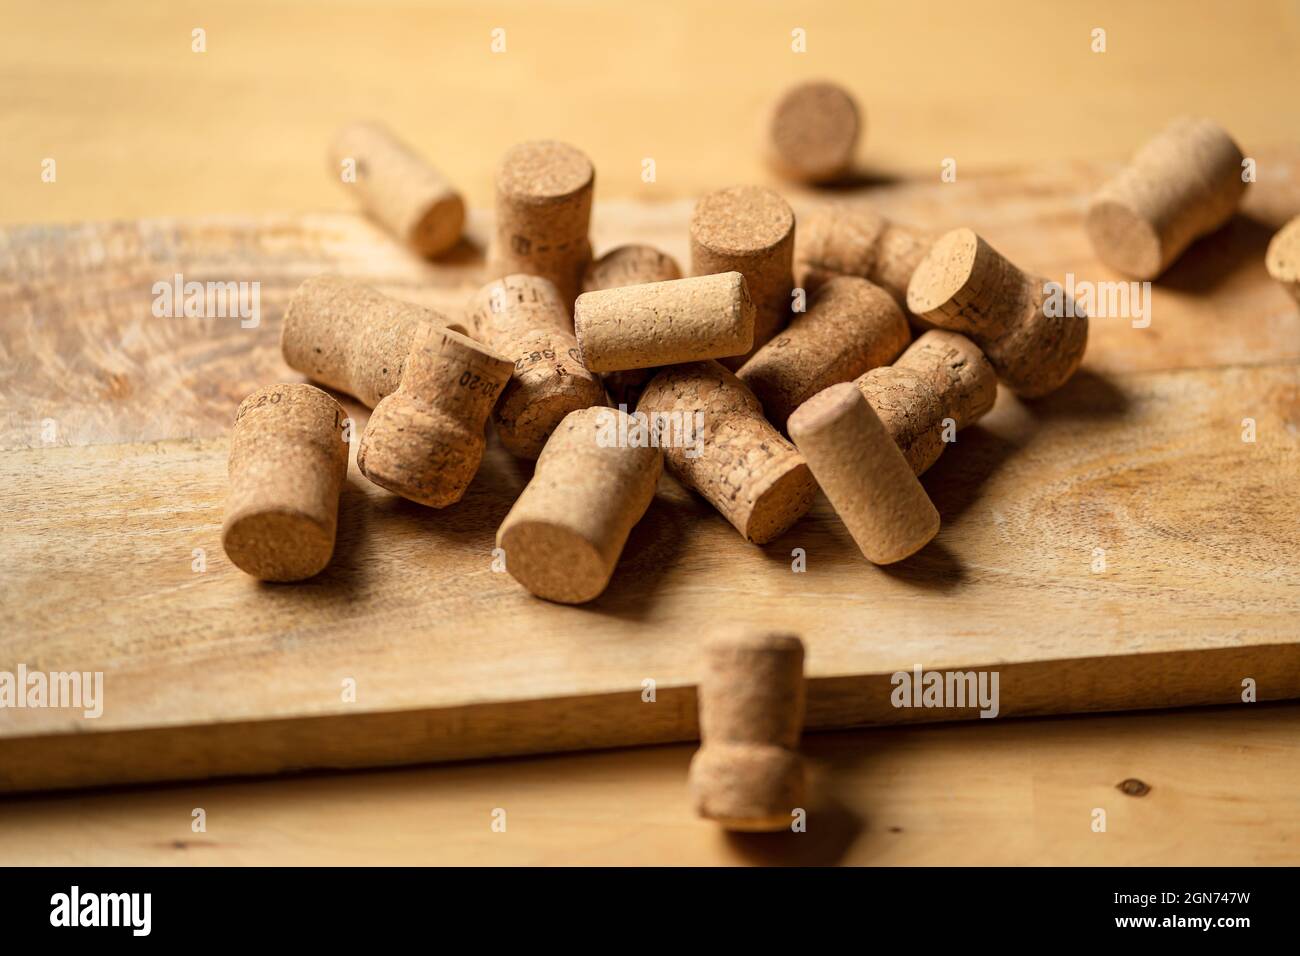 Bunch of wine corks on wooden table Stock Photo